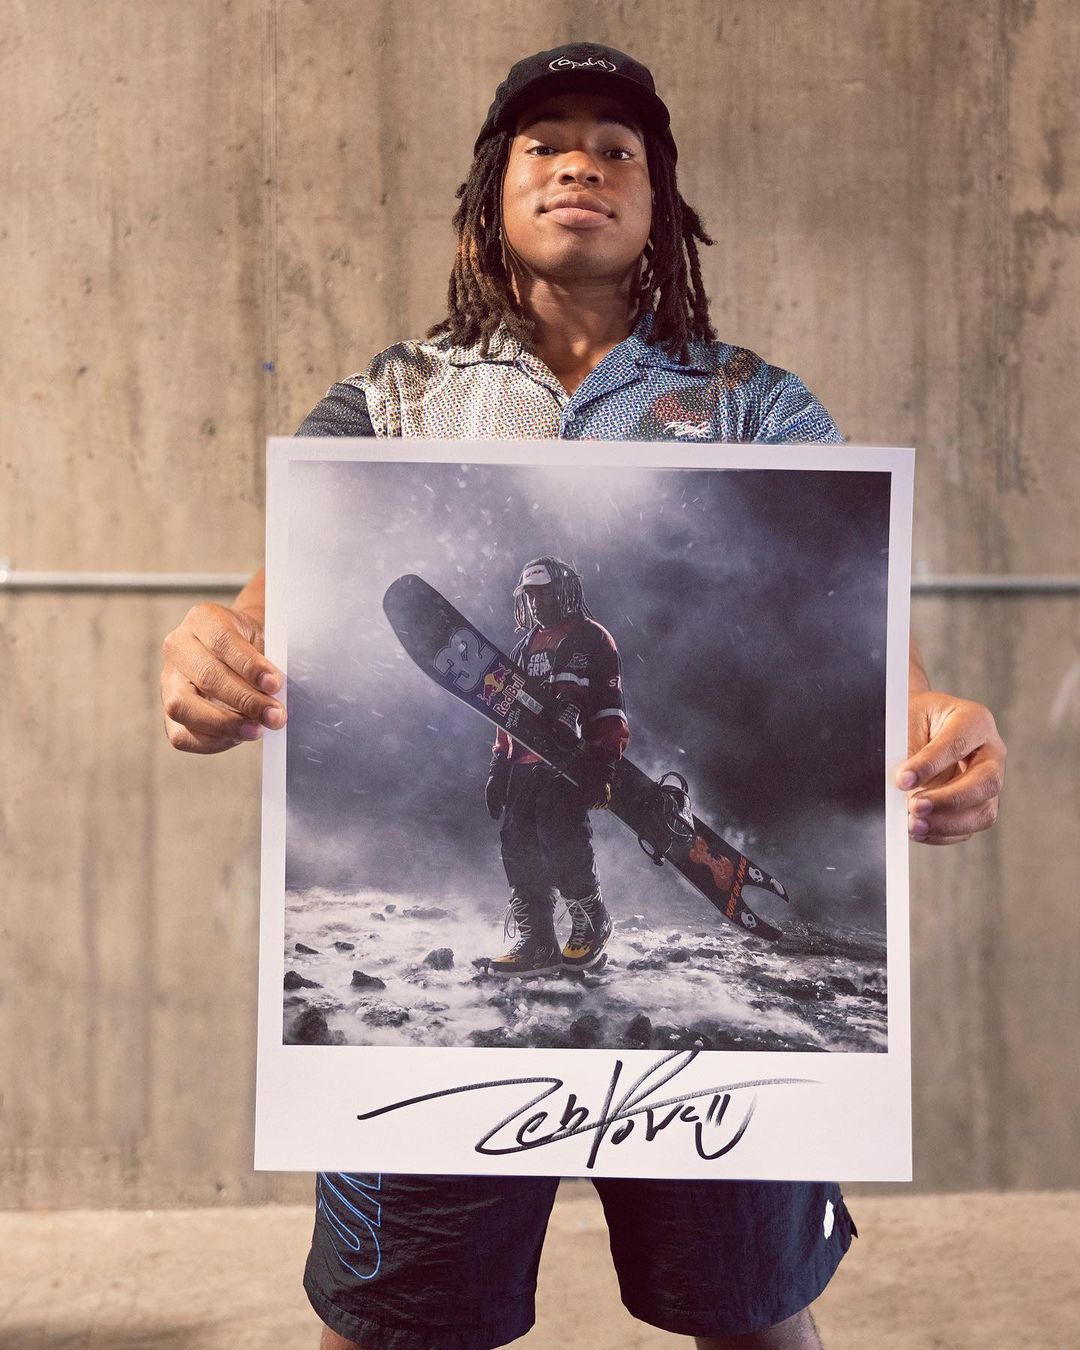 Zeb Powell With His Limited Edition Print